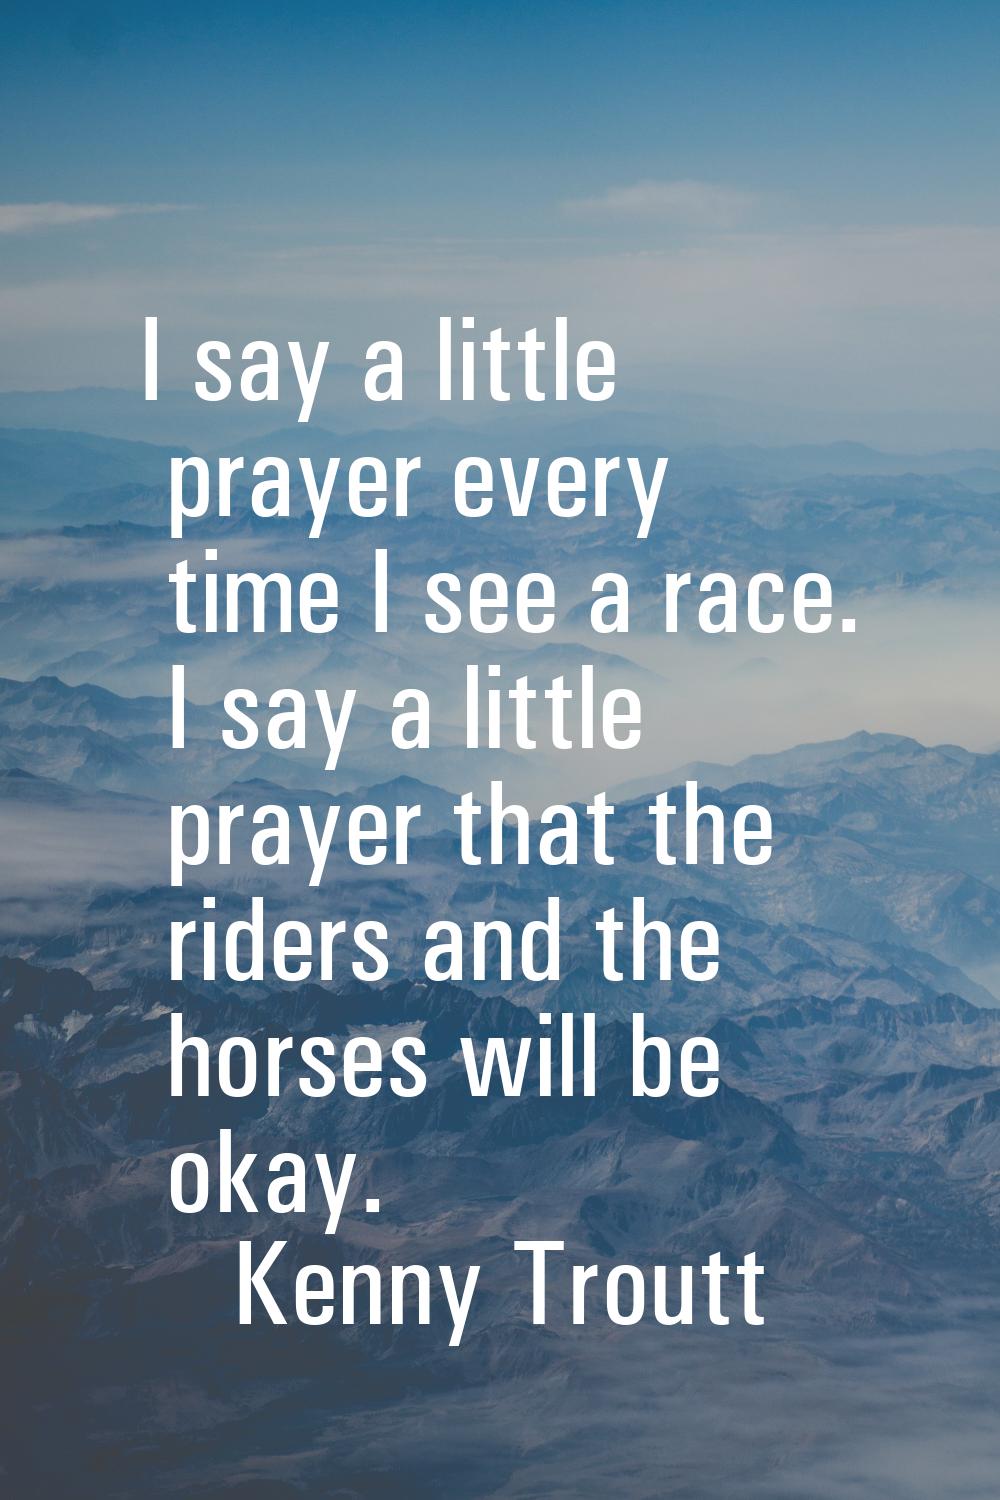 I say a little prayer every time I see a race. I say a little prayer that the riders and the horses